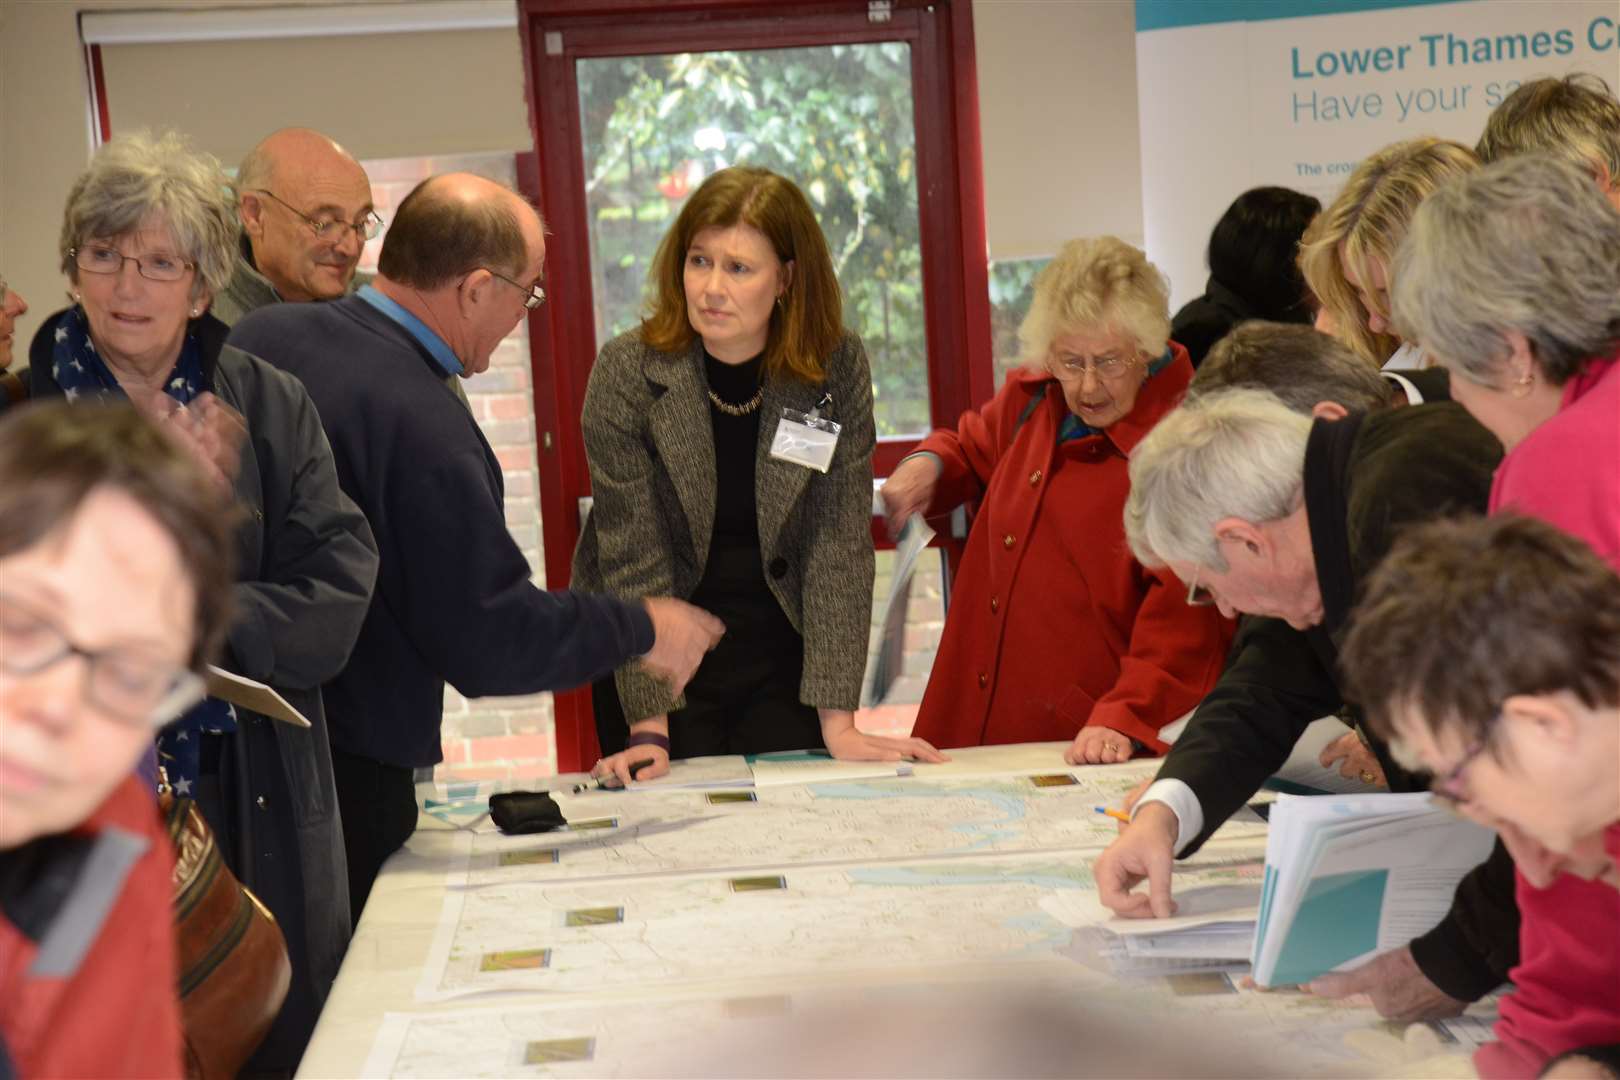 Thousands attended the consultations on the Lower Thames Crossing plans